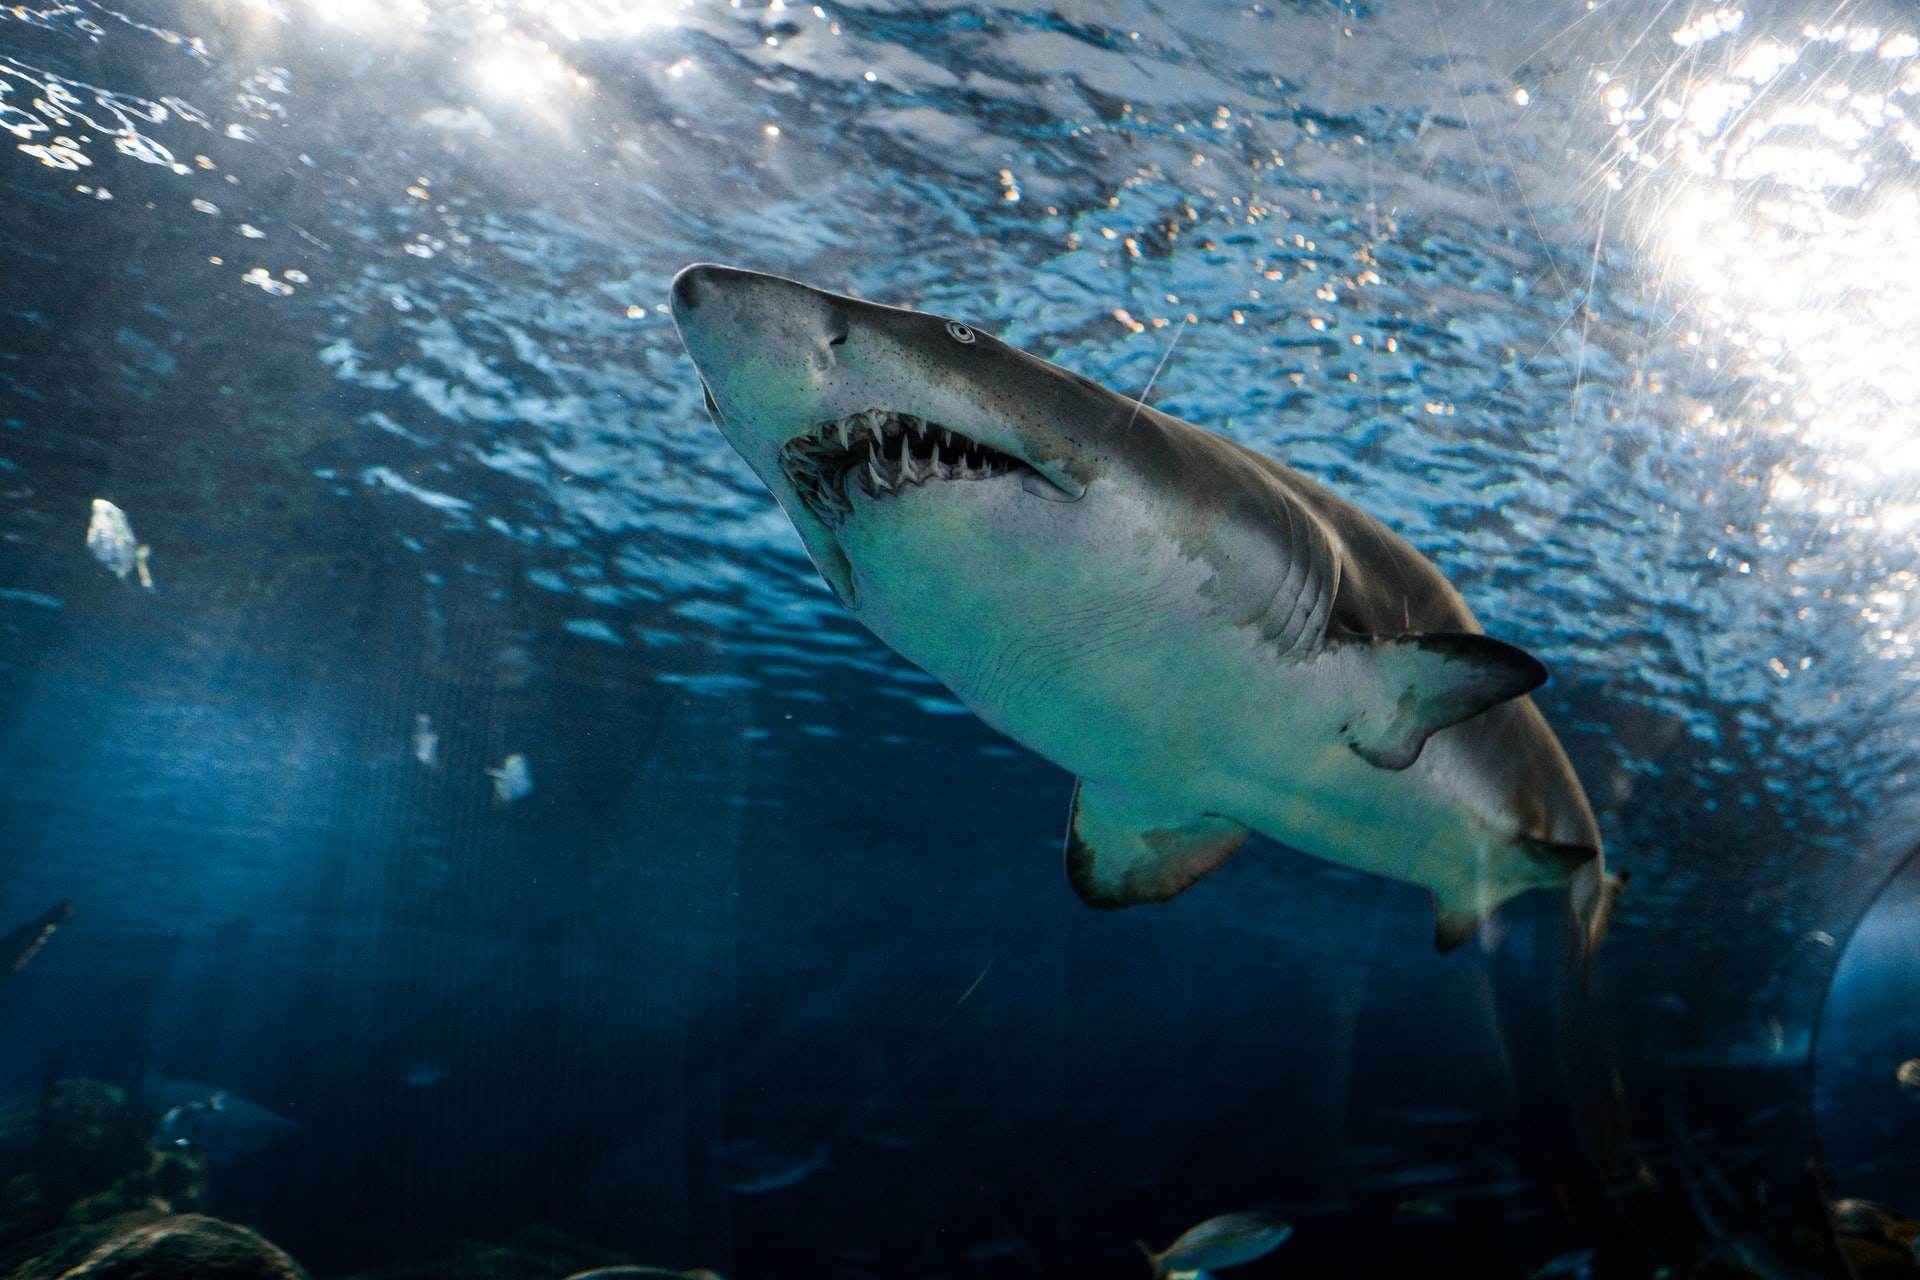 Income security is critical when if feels like you are swimming with sharks